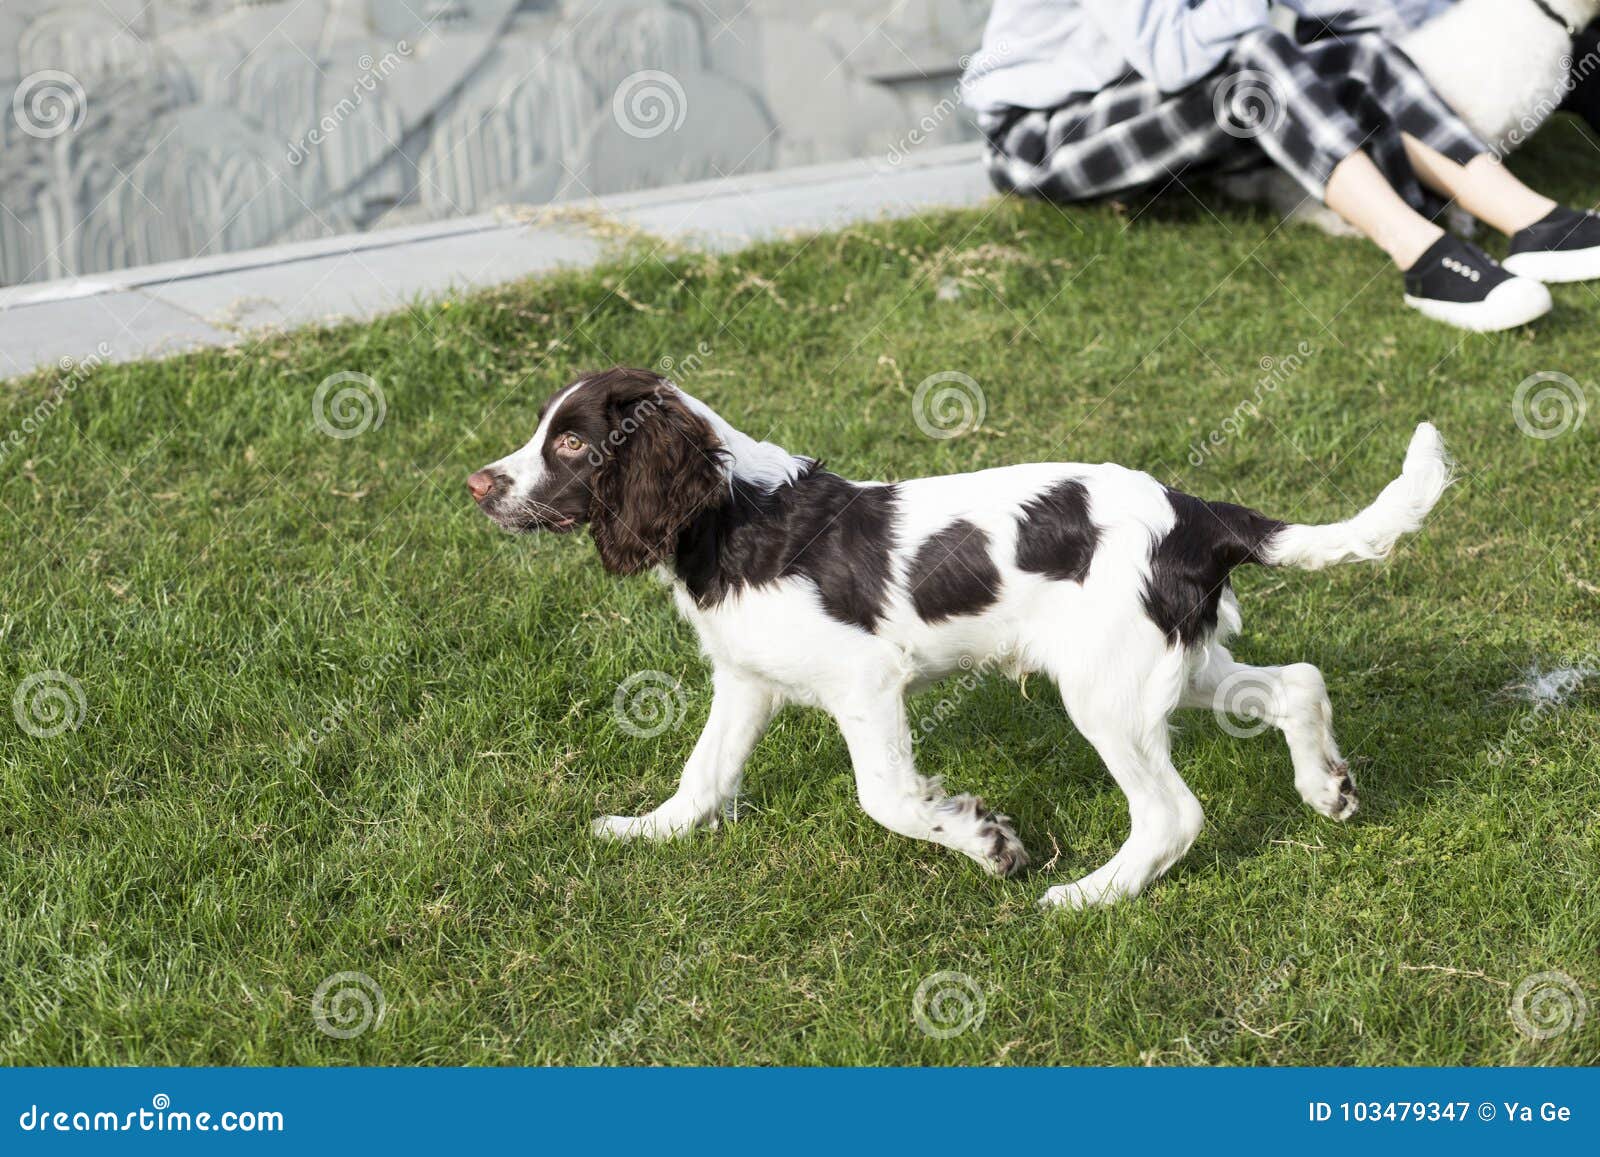 english springer spaniel with tail